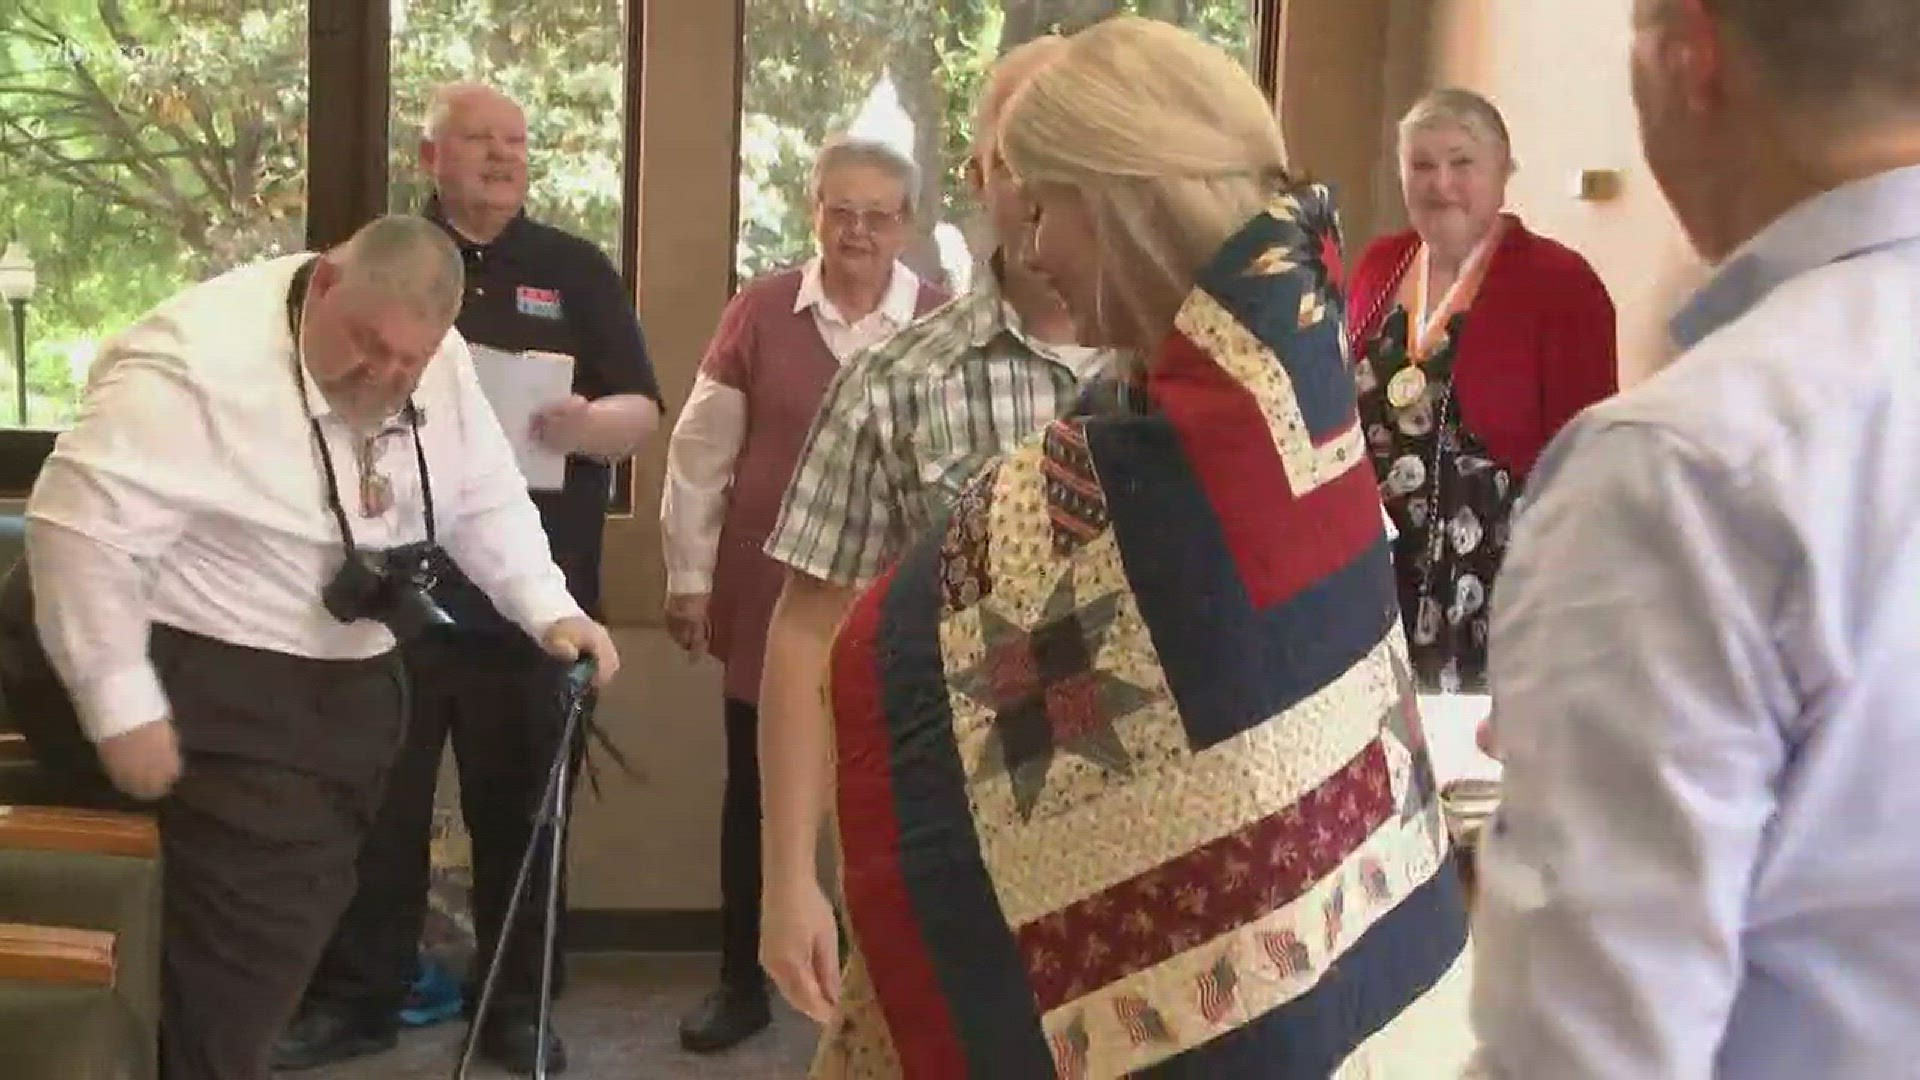 Volunteers held a ceremony at Hodges Library today. This is the first time they've handed out quilts to female veterans at UT.